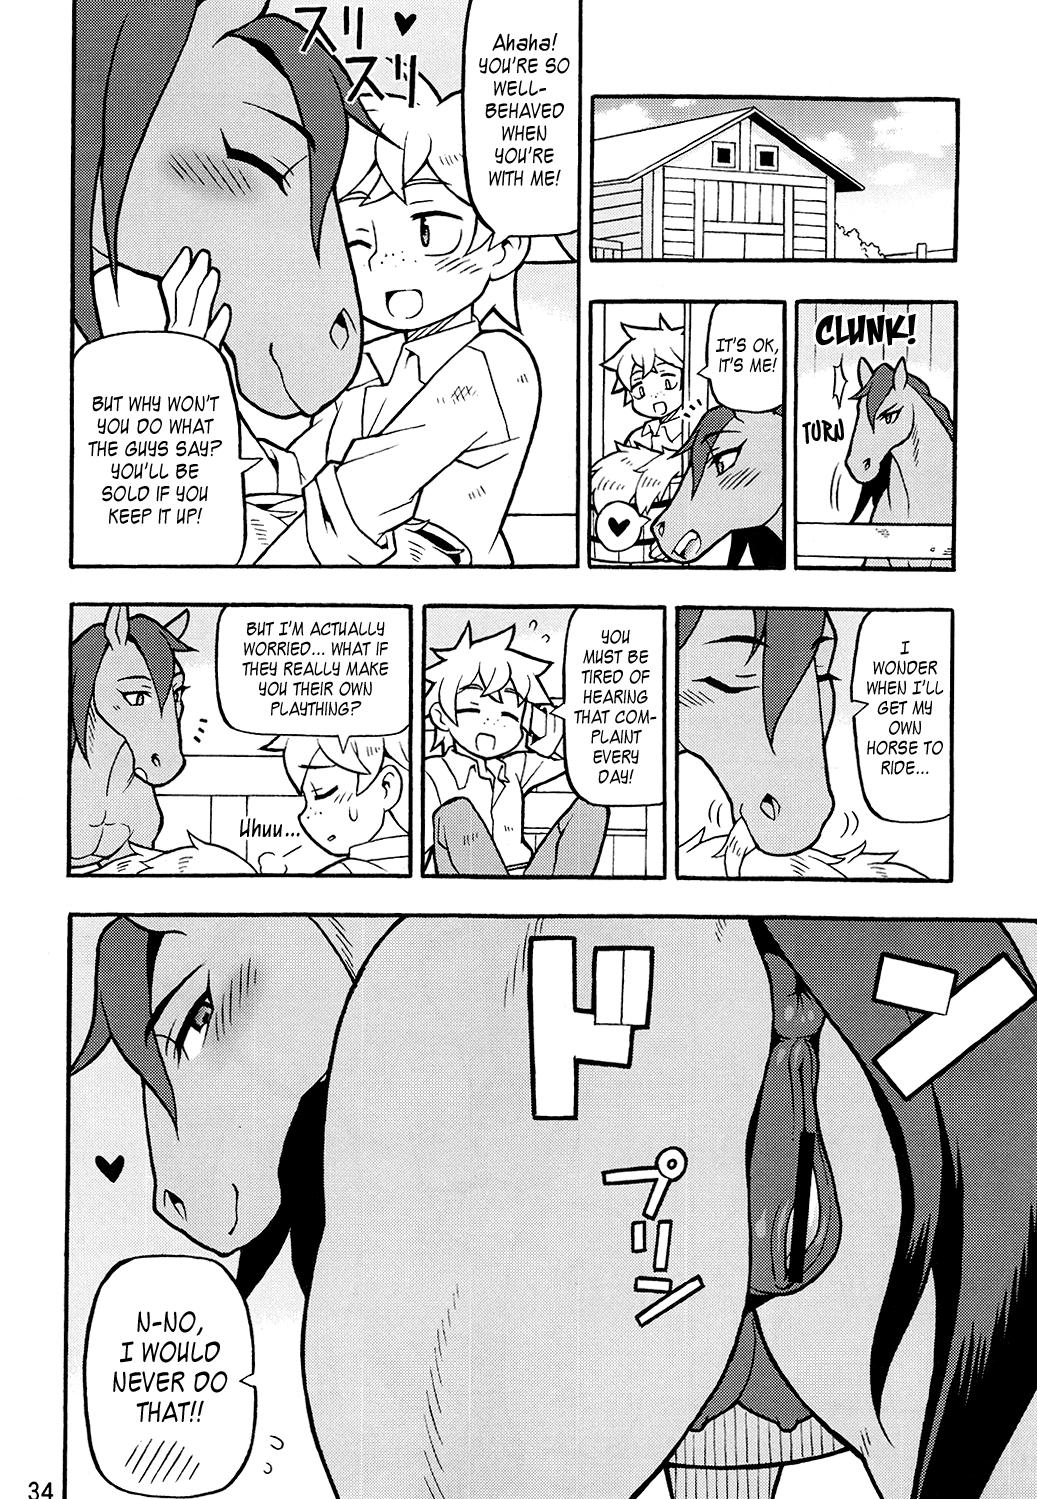 Close Up Mare Holic 4 Kemolover EX Ch. 4, 8, 10-11, 19, 29 Joi - Page 4